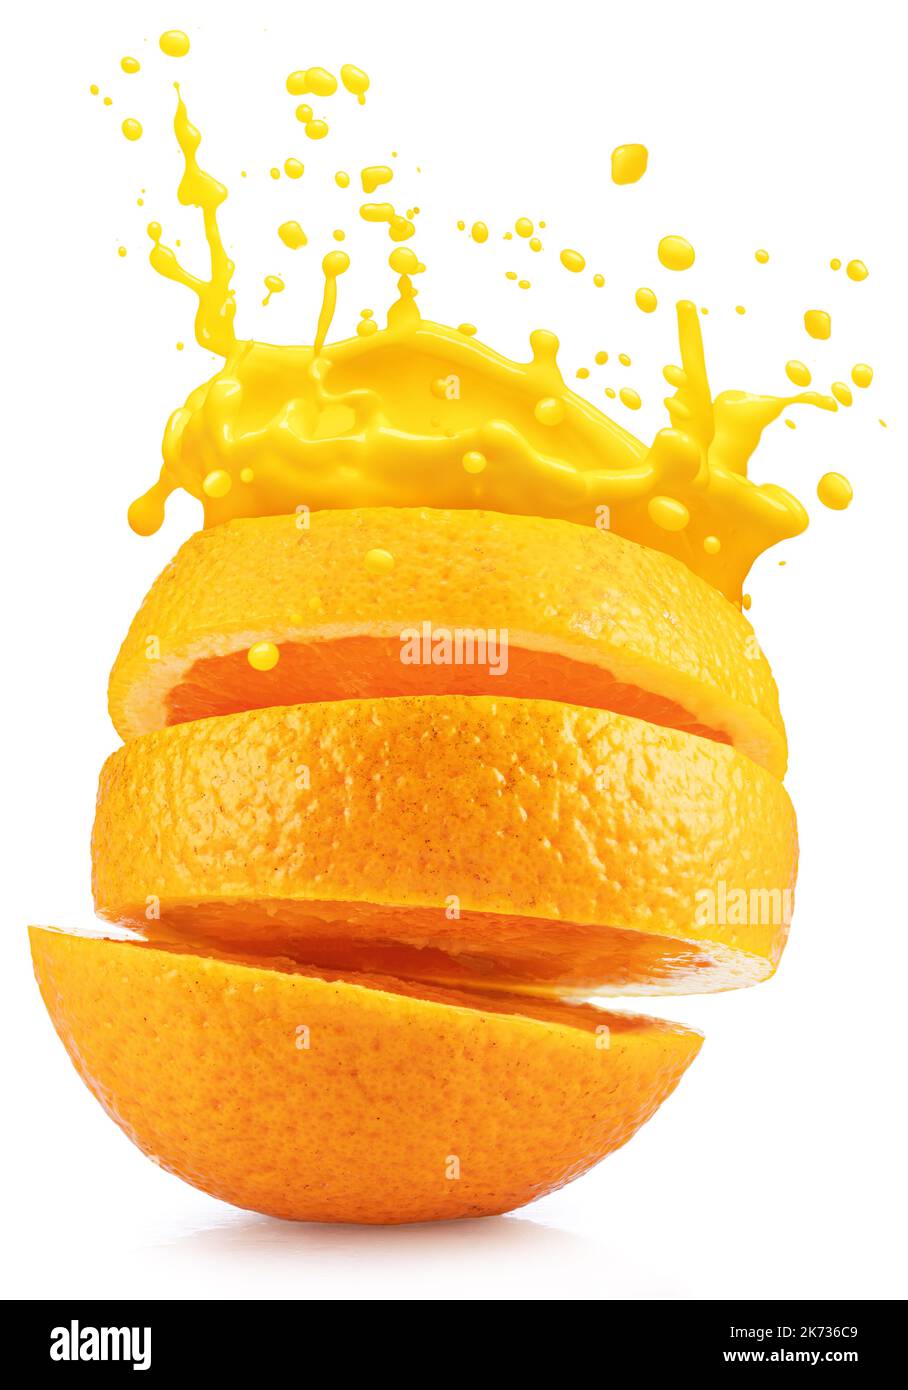 Sliced orange fruit with splash of juicy crown on white background. Conceptual food and drink picture. Stock Photo